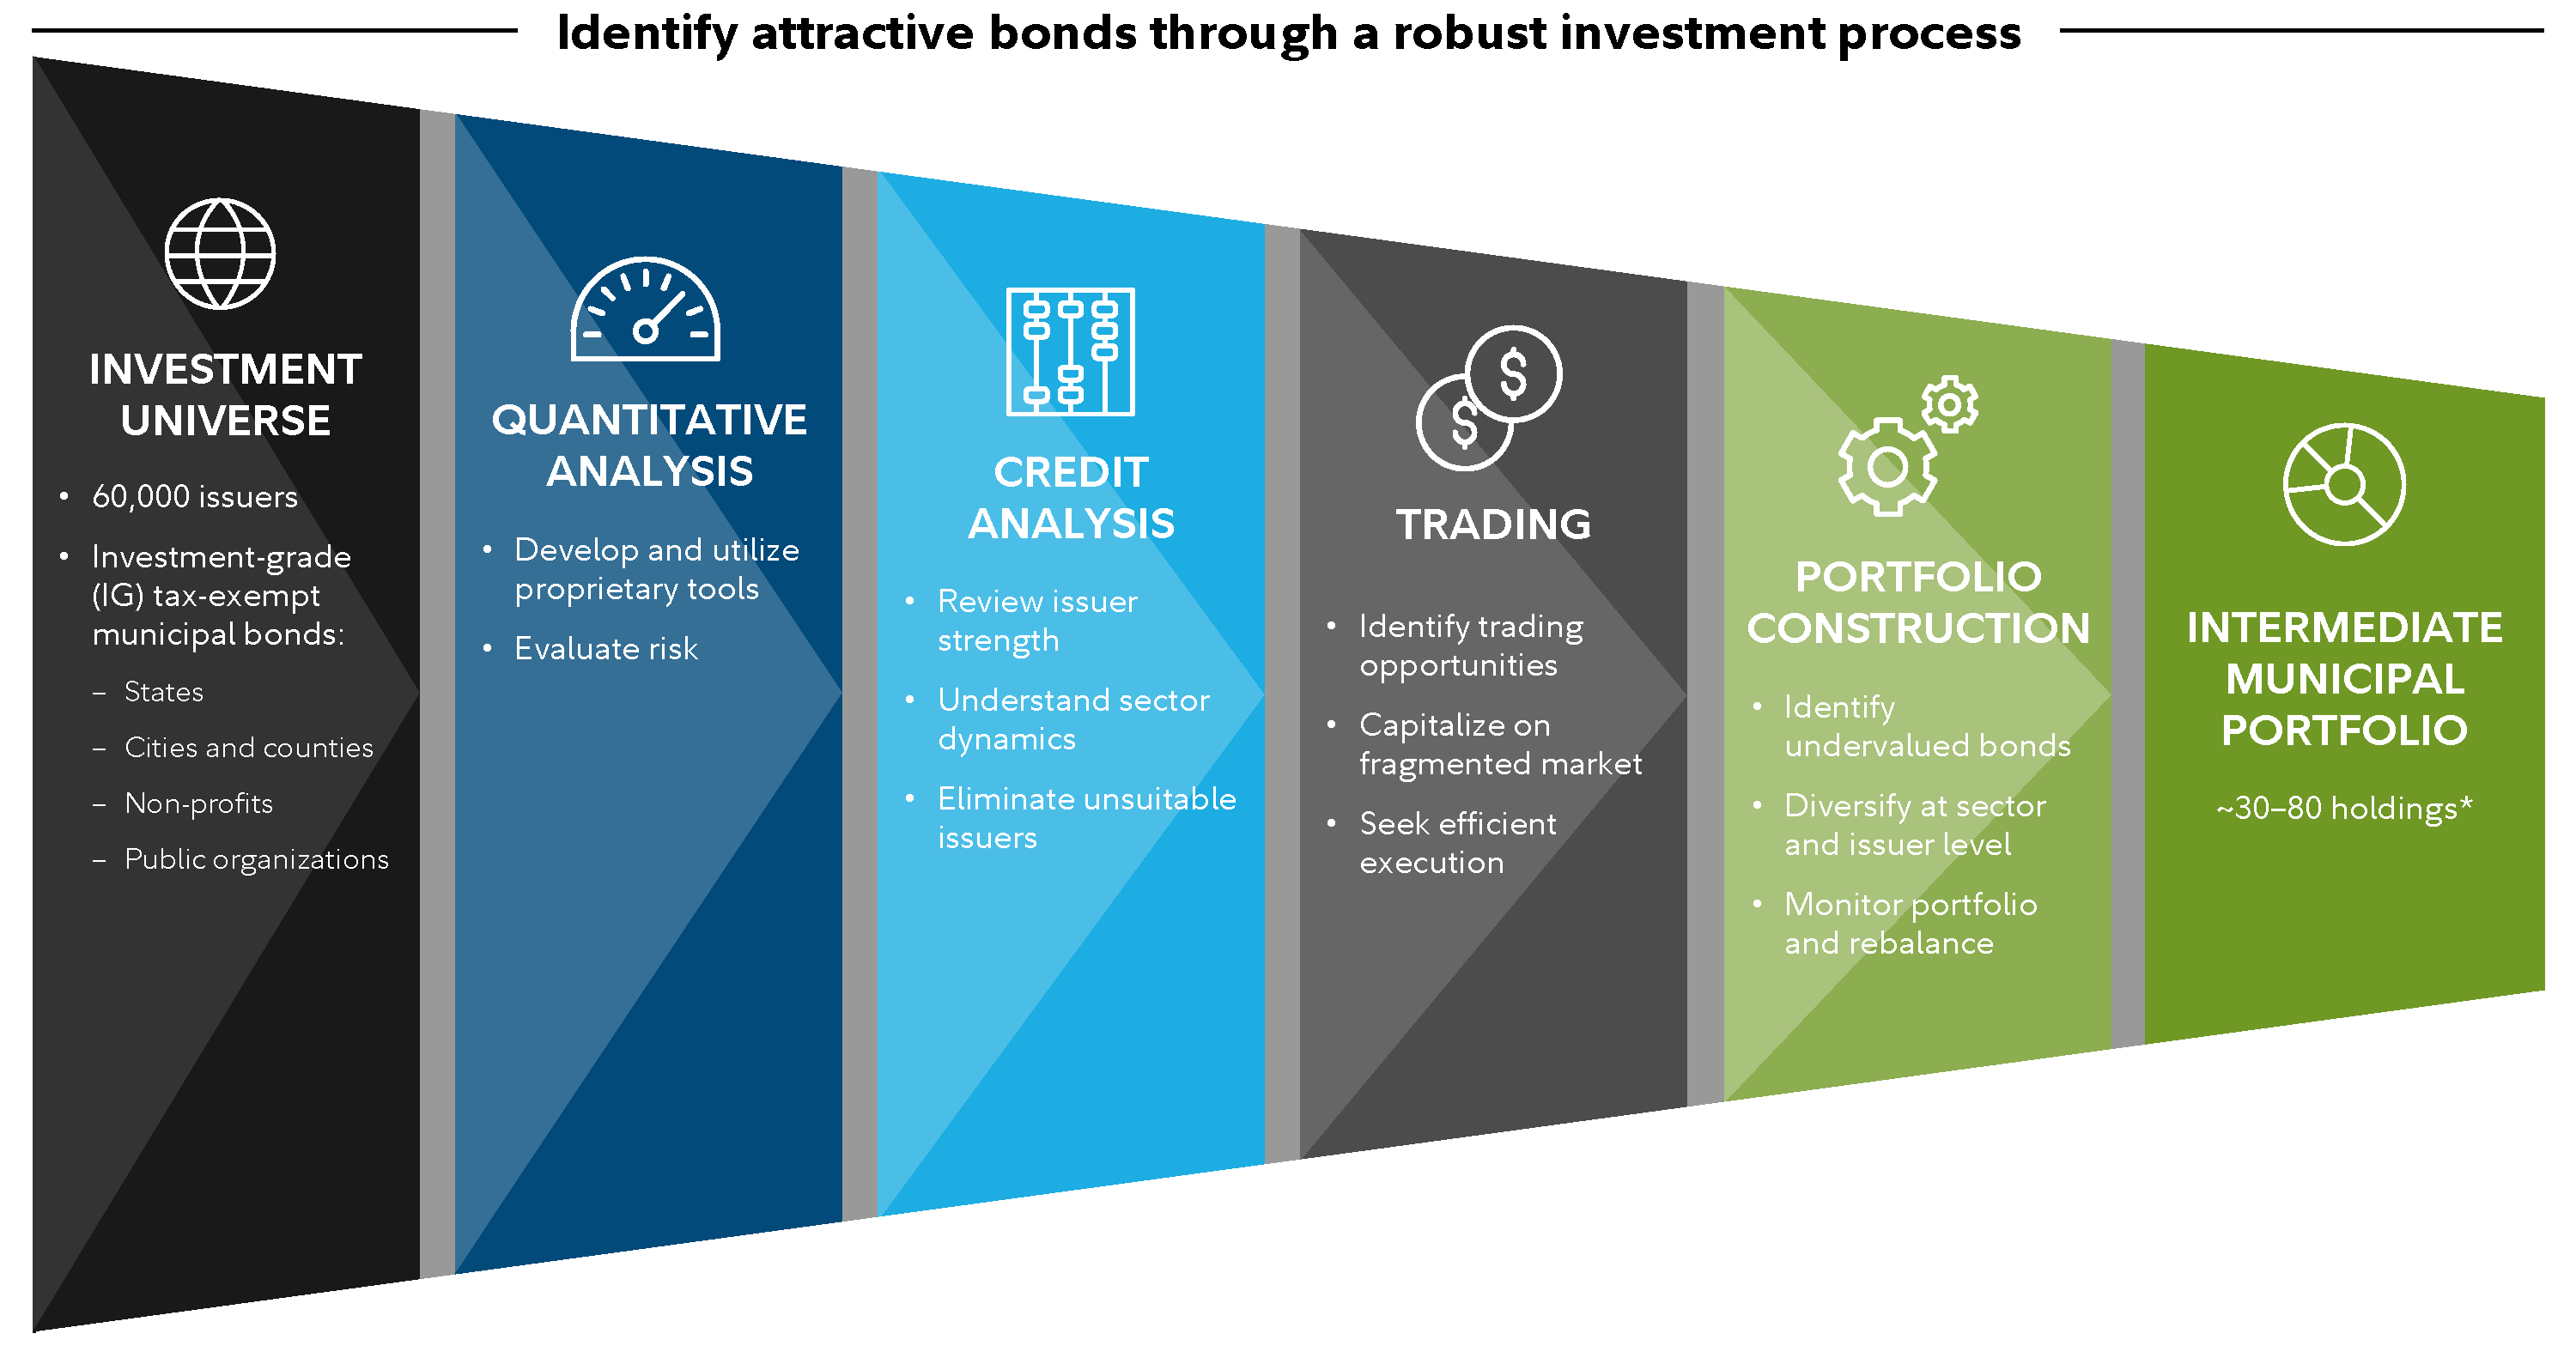 Investment Process chart displays the 6 elements of our investment process for the Fidelity Intermediate Municipal Strategy — Investment Universe, Quantitative Analysis, Credit Analysis, Trading, Portfolio Construction, and Intermediate Municipal Portfolio.